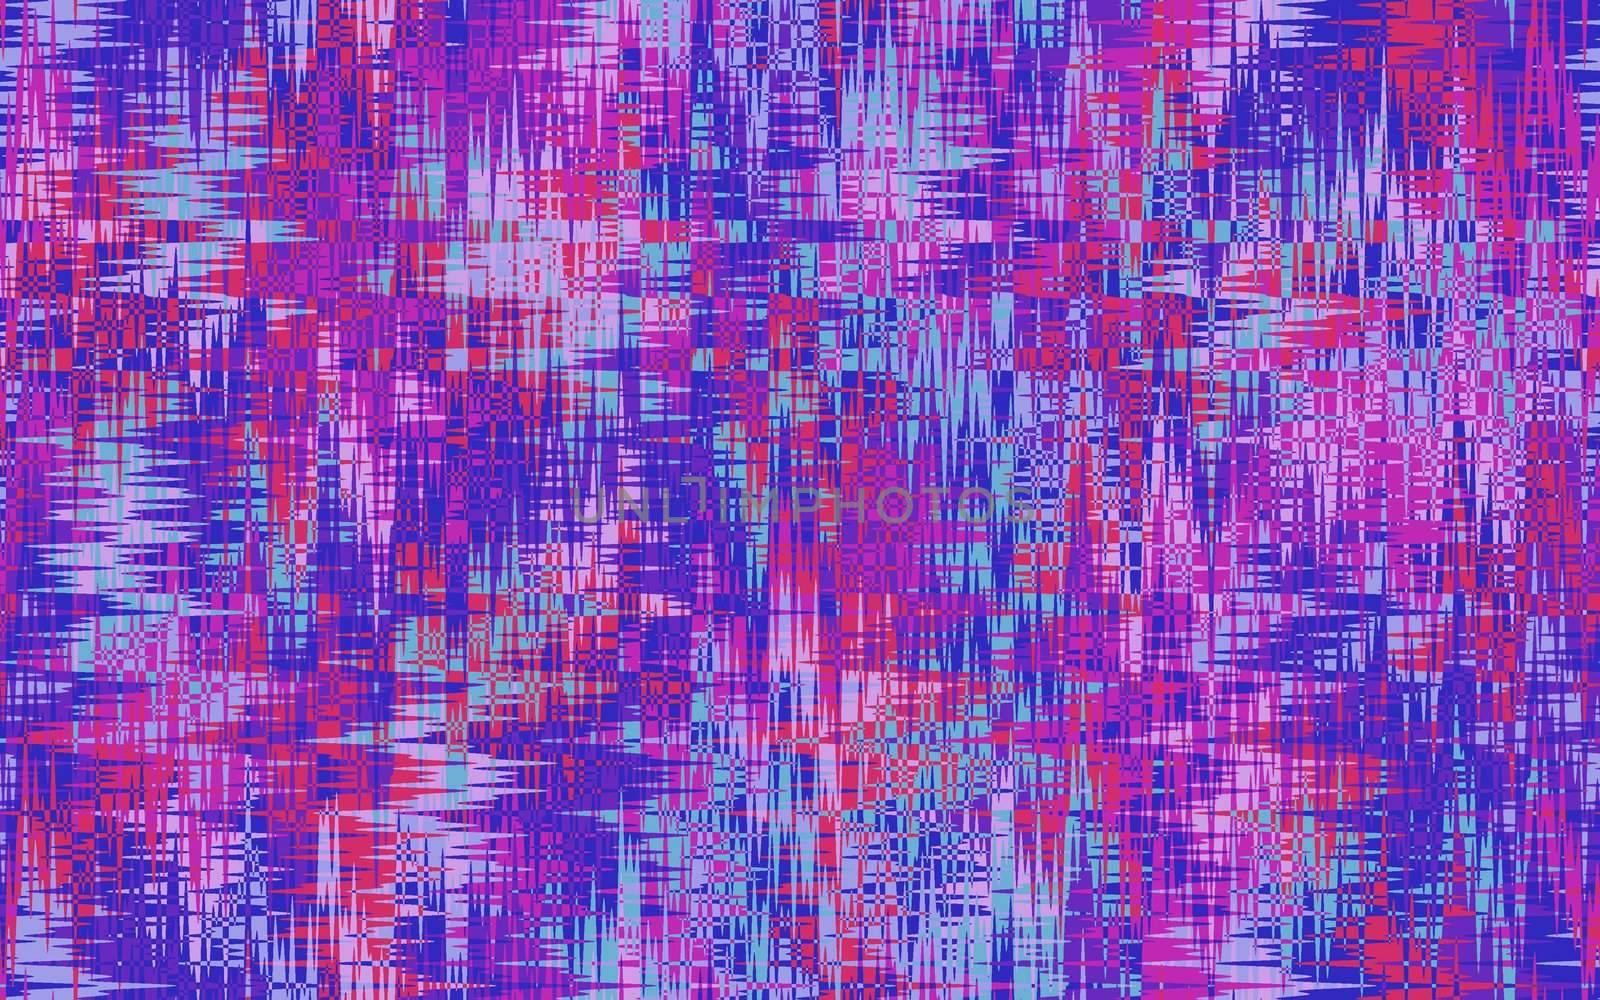 distorted overlapping pink and purple shapes create an interwoven pattern